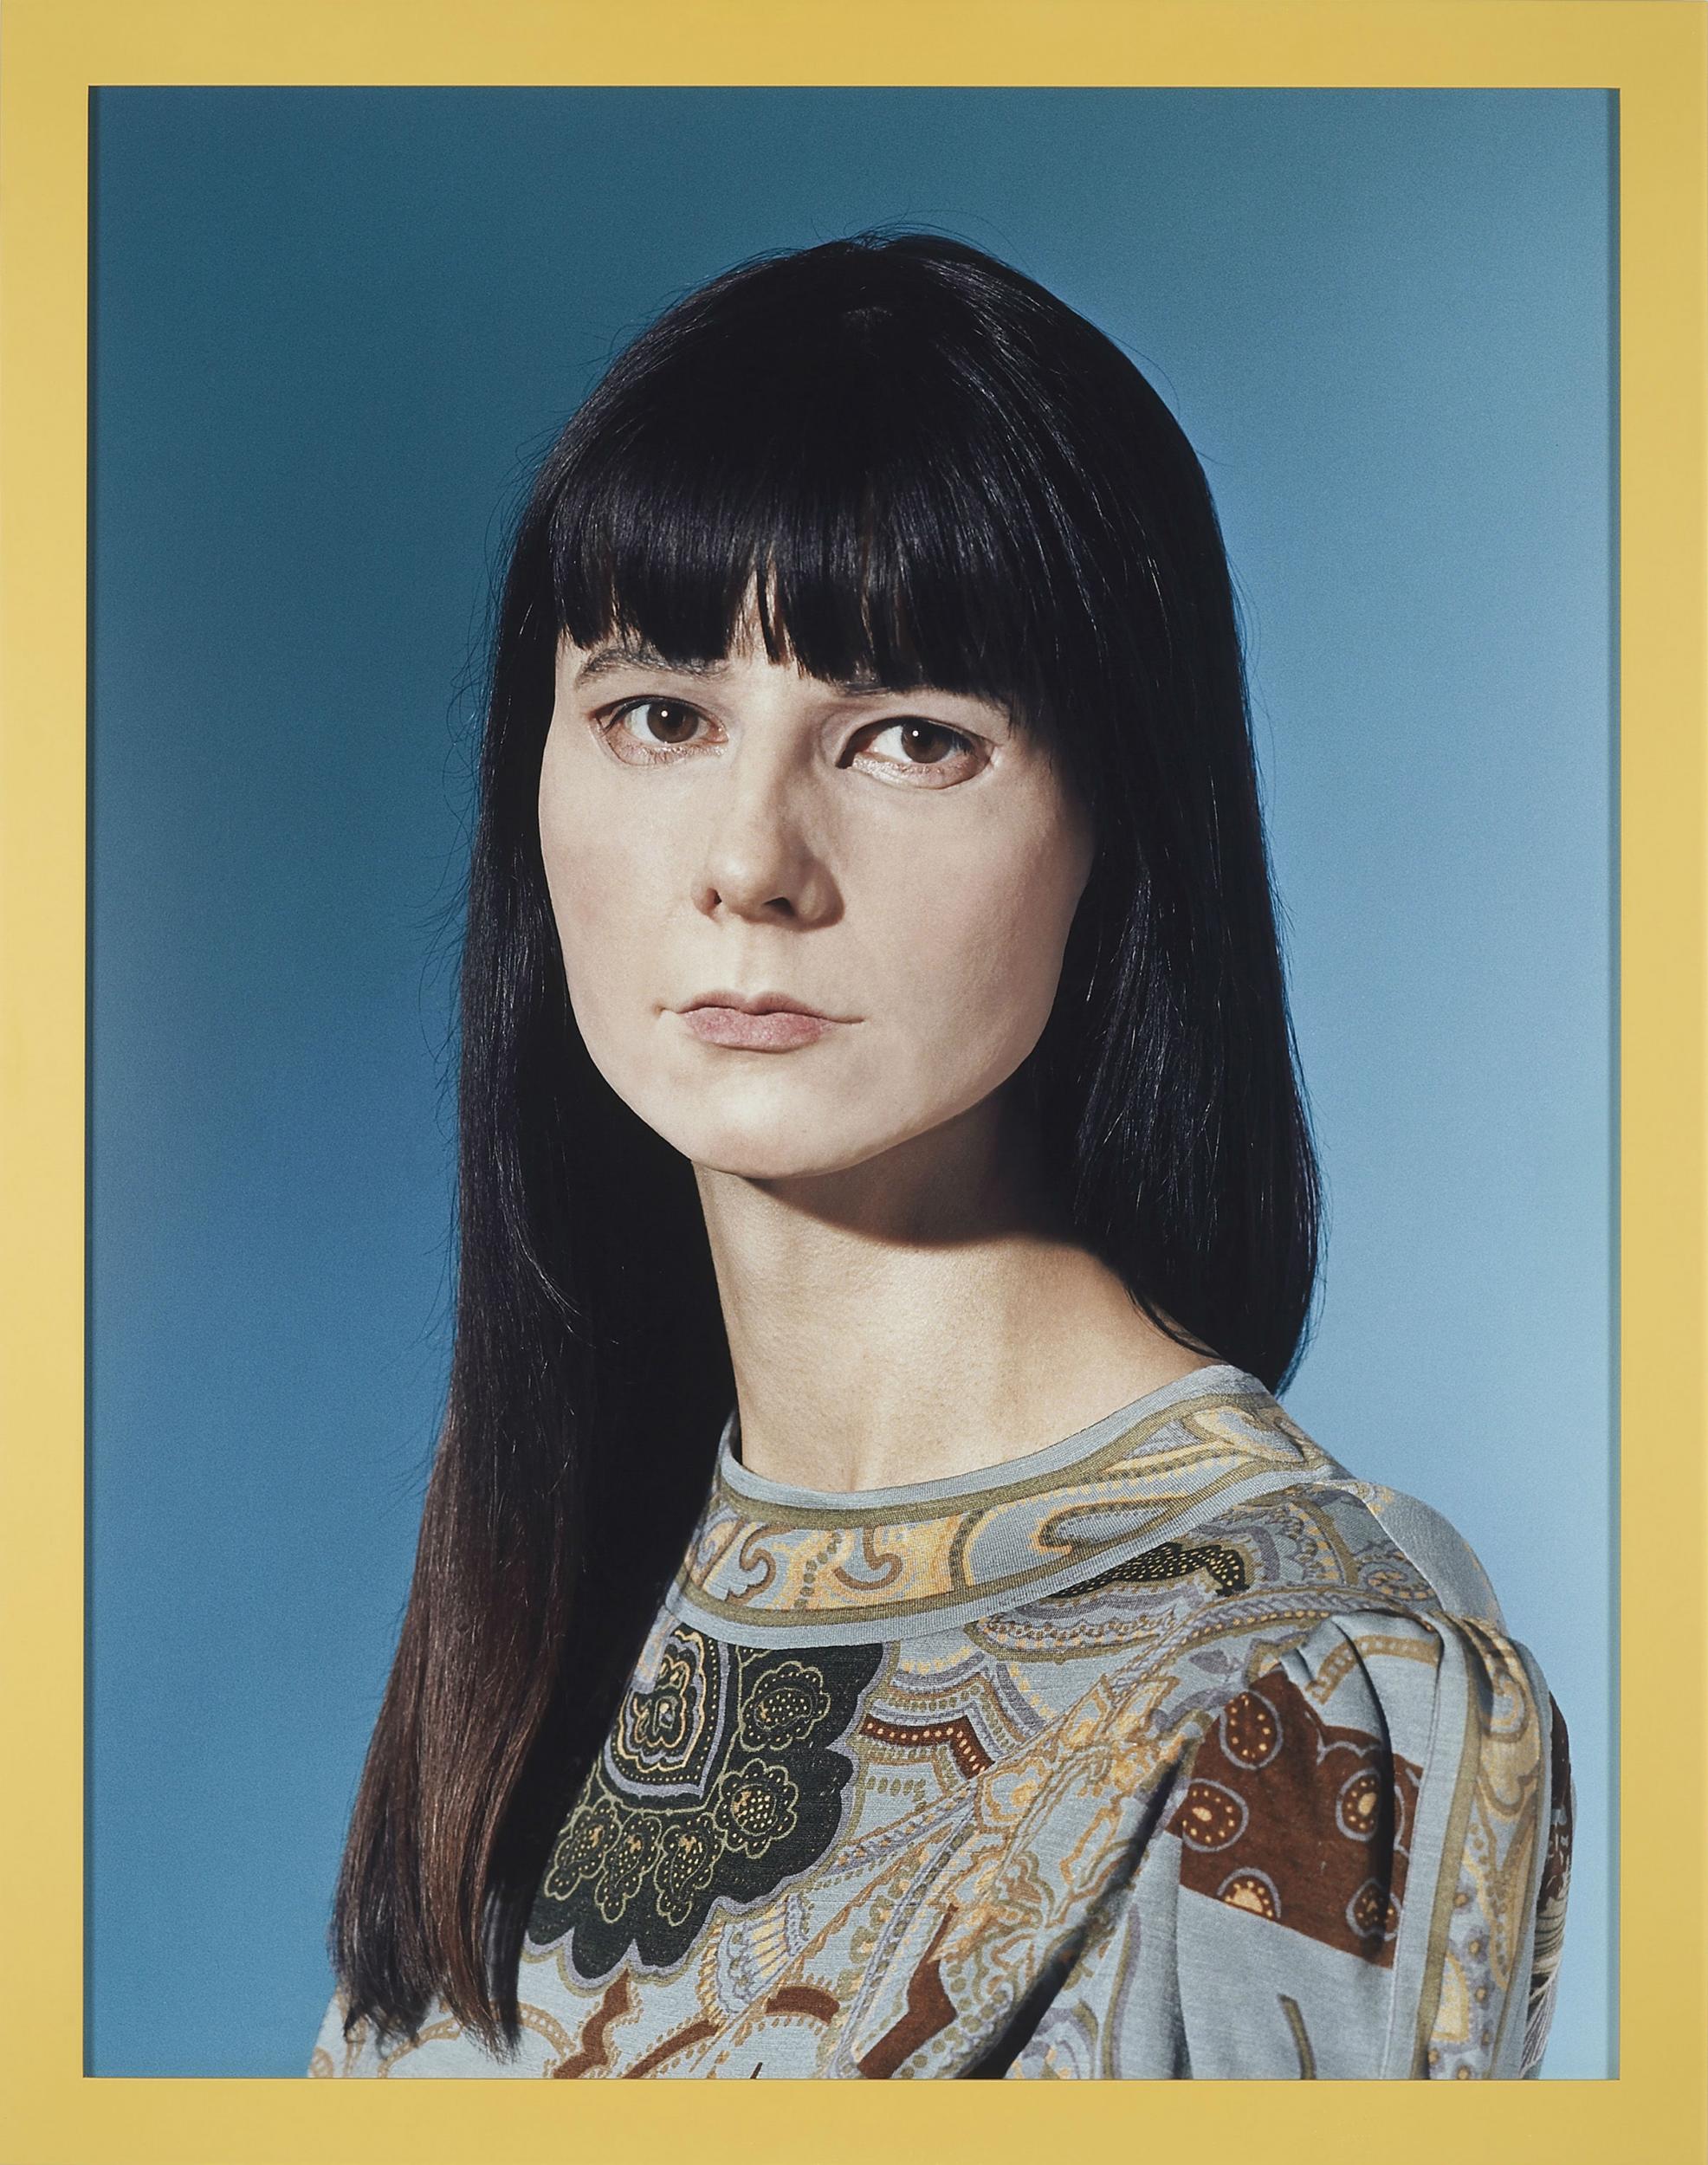 'Self-portrait of me now in a mask' by Gillian Wearing, 2011